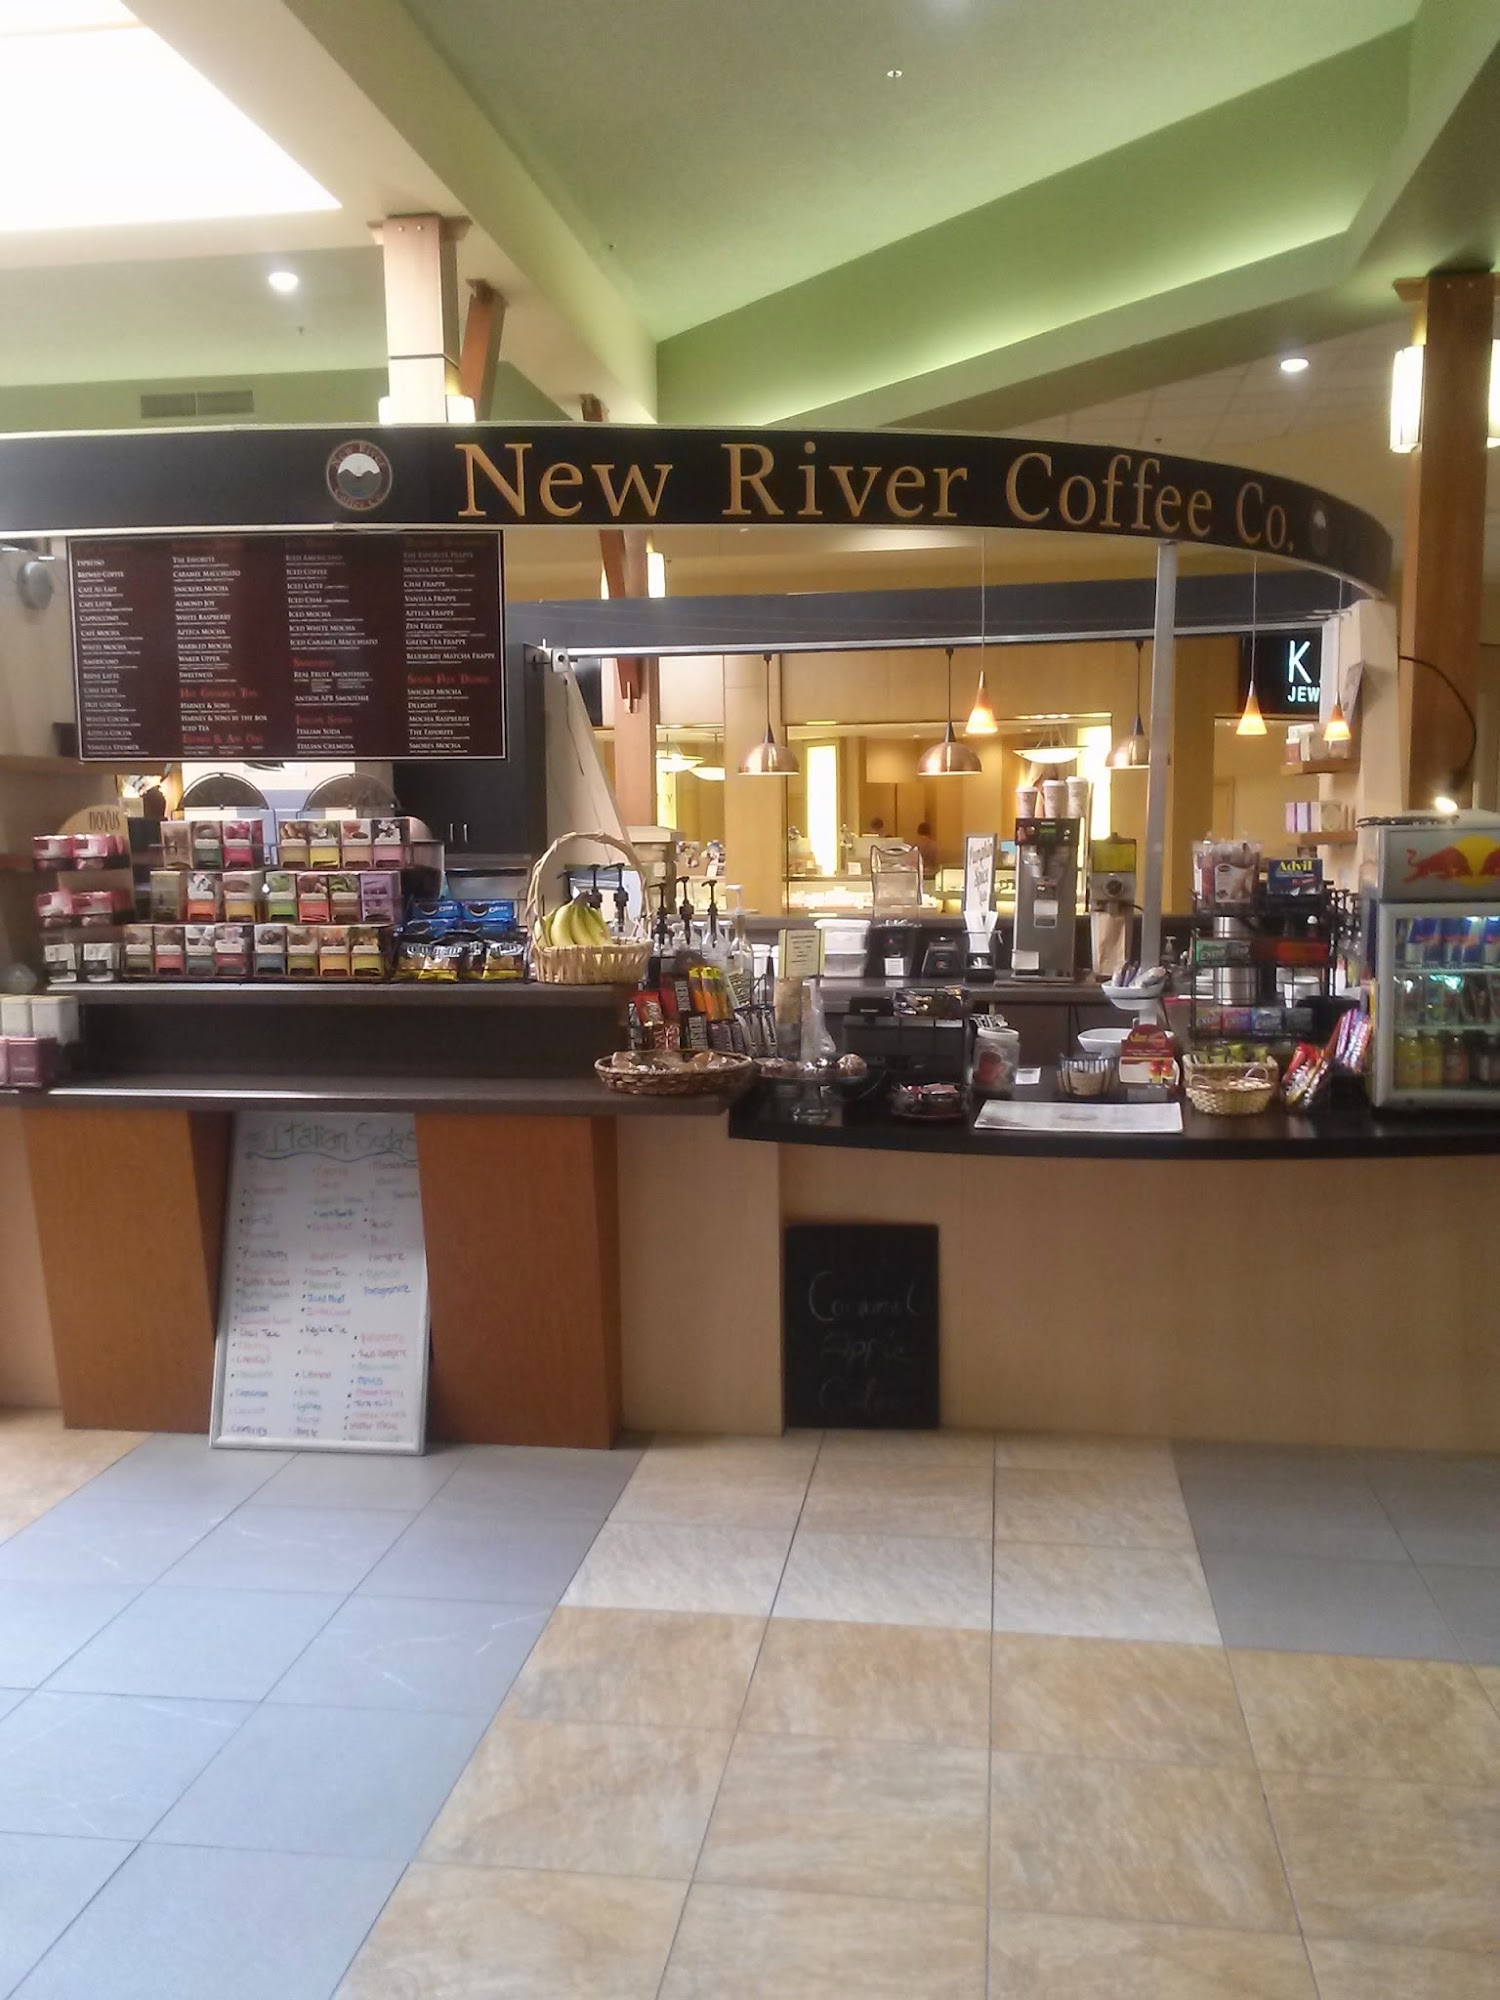 New River Coffee Co